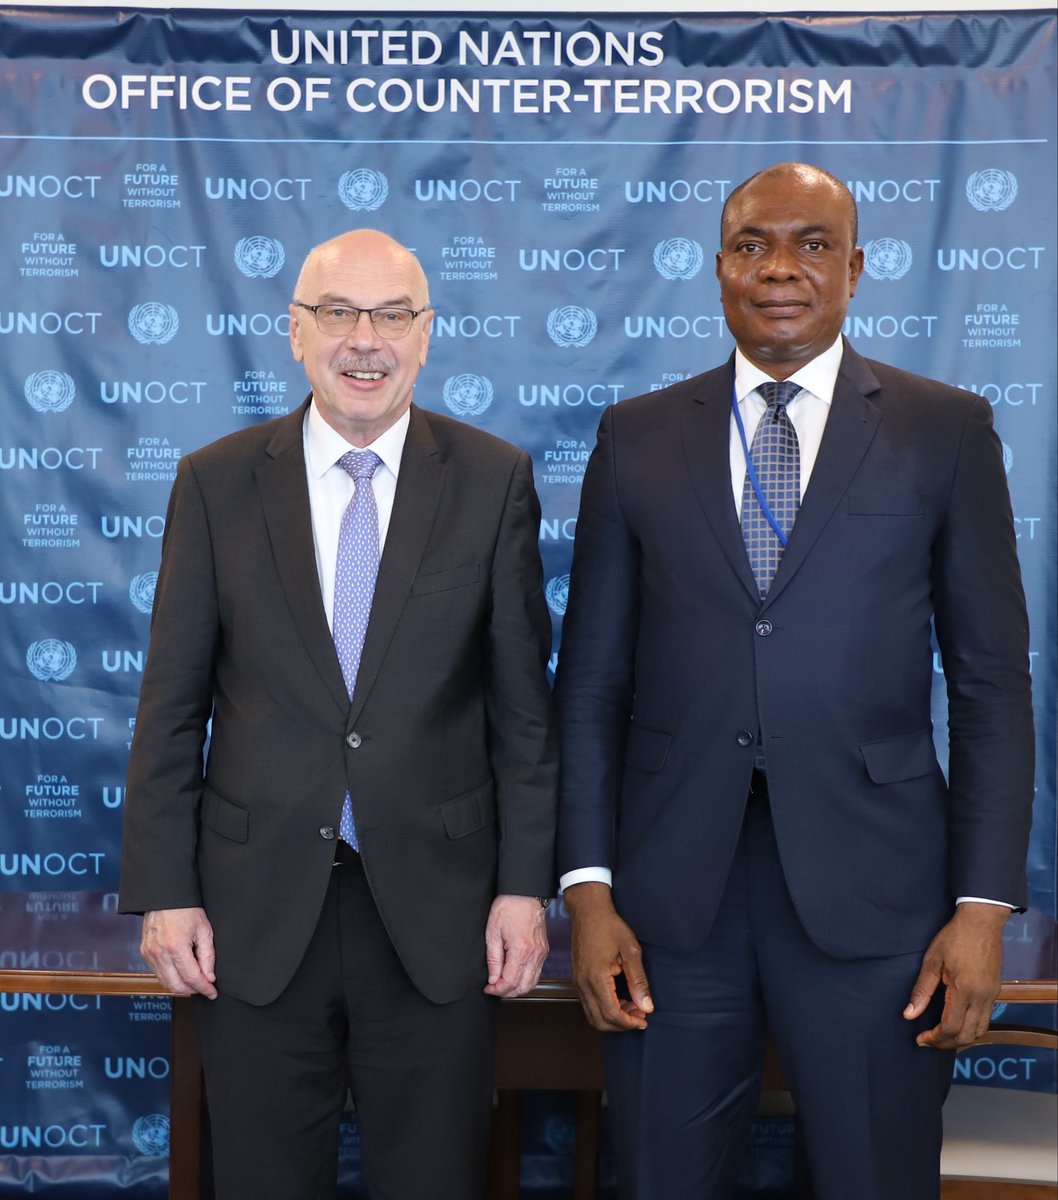 Mr. Syndoph Endoni, Chargé d'Affaires of the Permanent Mission of #Nigeria, paid a courtesy visit to USG Voronkov to thank him for @UN_OCT's support to 🇳🇬in organizing the High-Level #AfricaCTMeeting & looked forward to working closely together in implementing the 'Abuja Process'